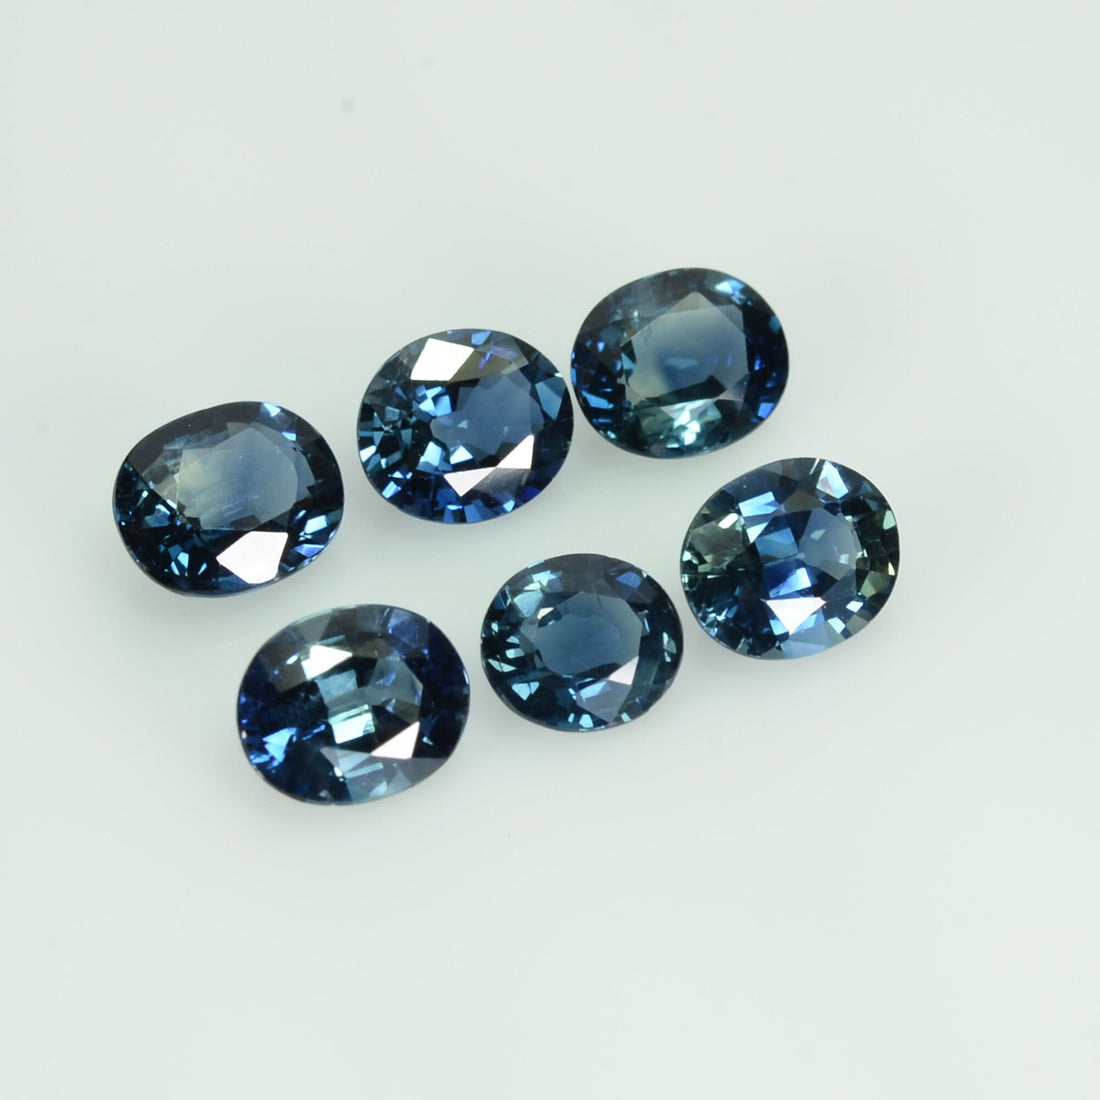 6x5 mm Natural Calibrated Blue Sapphire Loose Gemstone Oval Cut